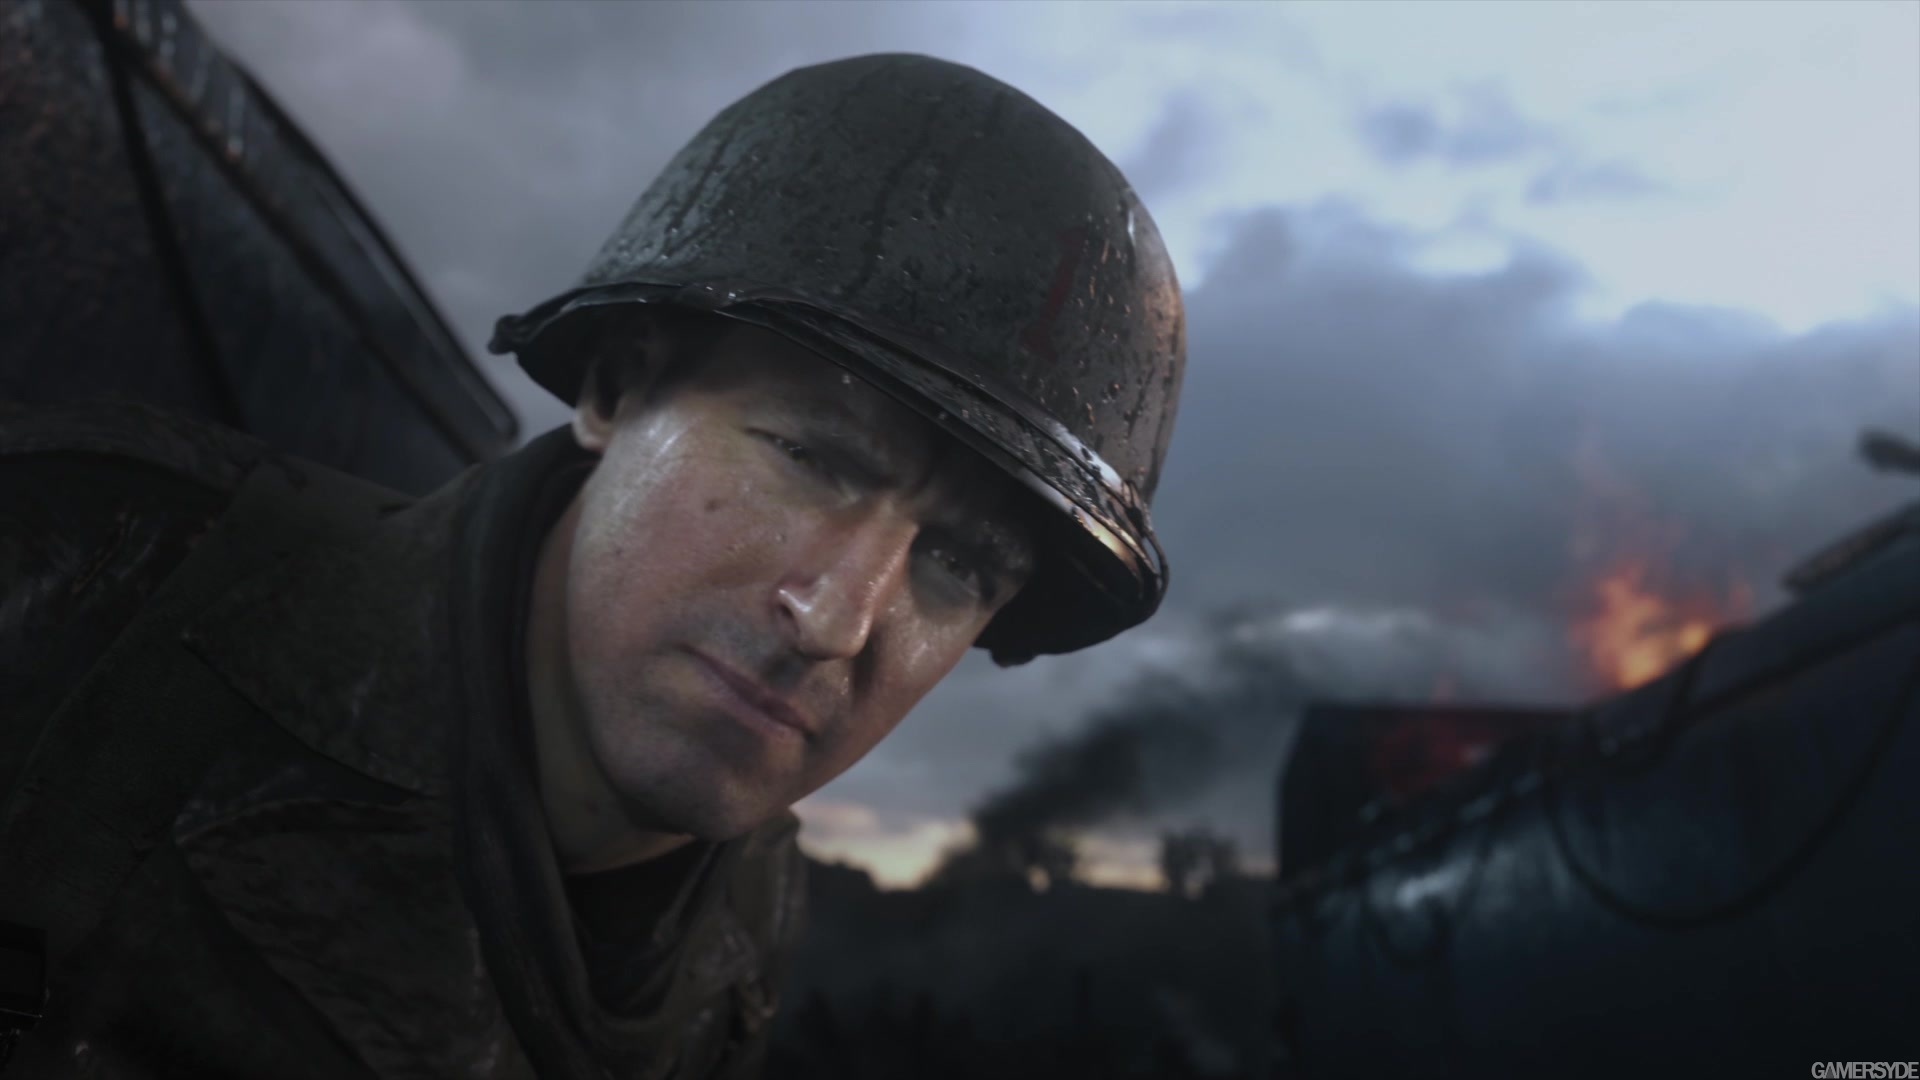 image_call_of_duty_wwii-35210-3843_0003.jpg